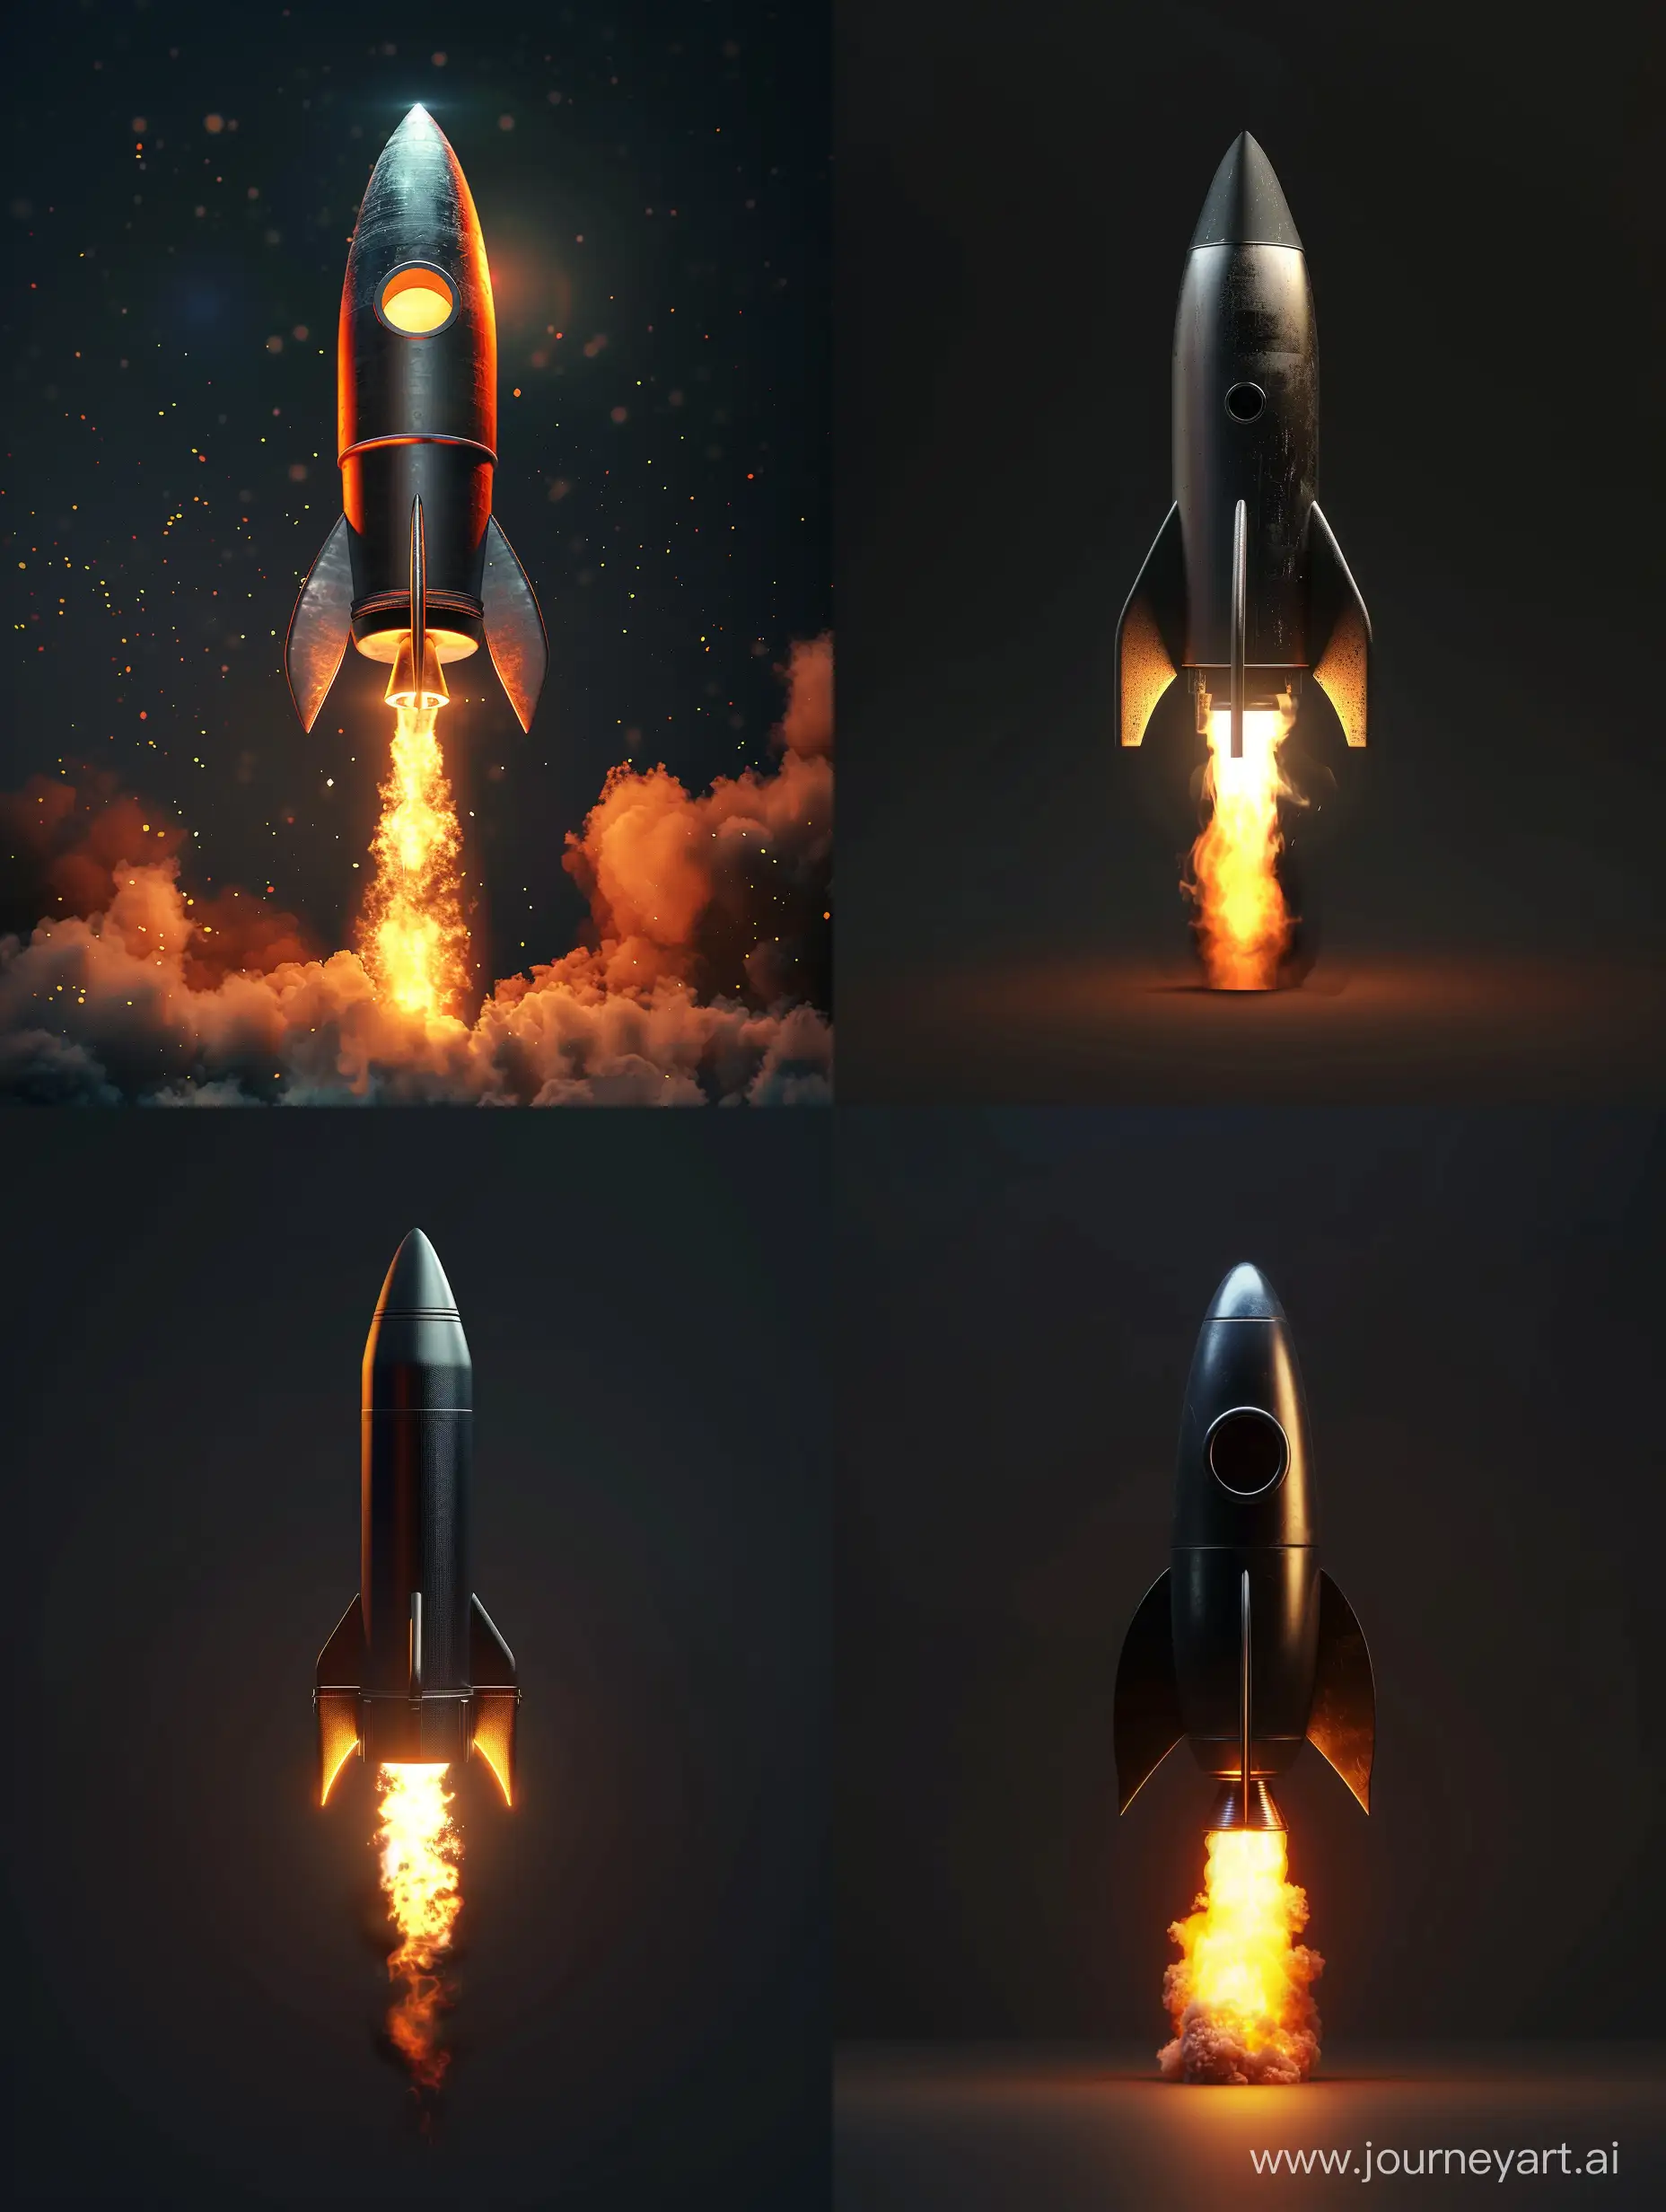 Dynamic-3D-Rocket-Launch-with-Fiery-Exhaust-Striking-Dark-Background-Image